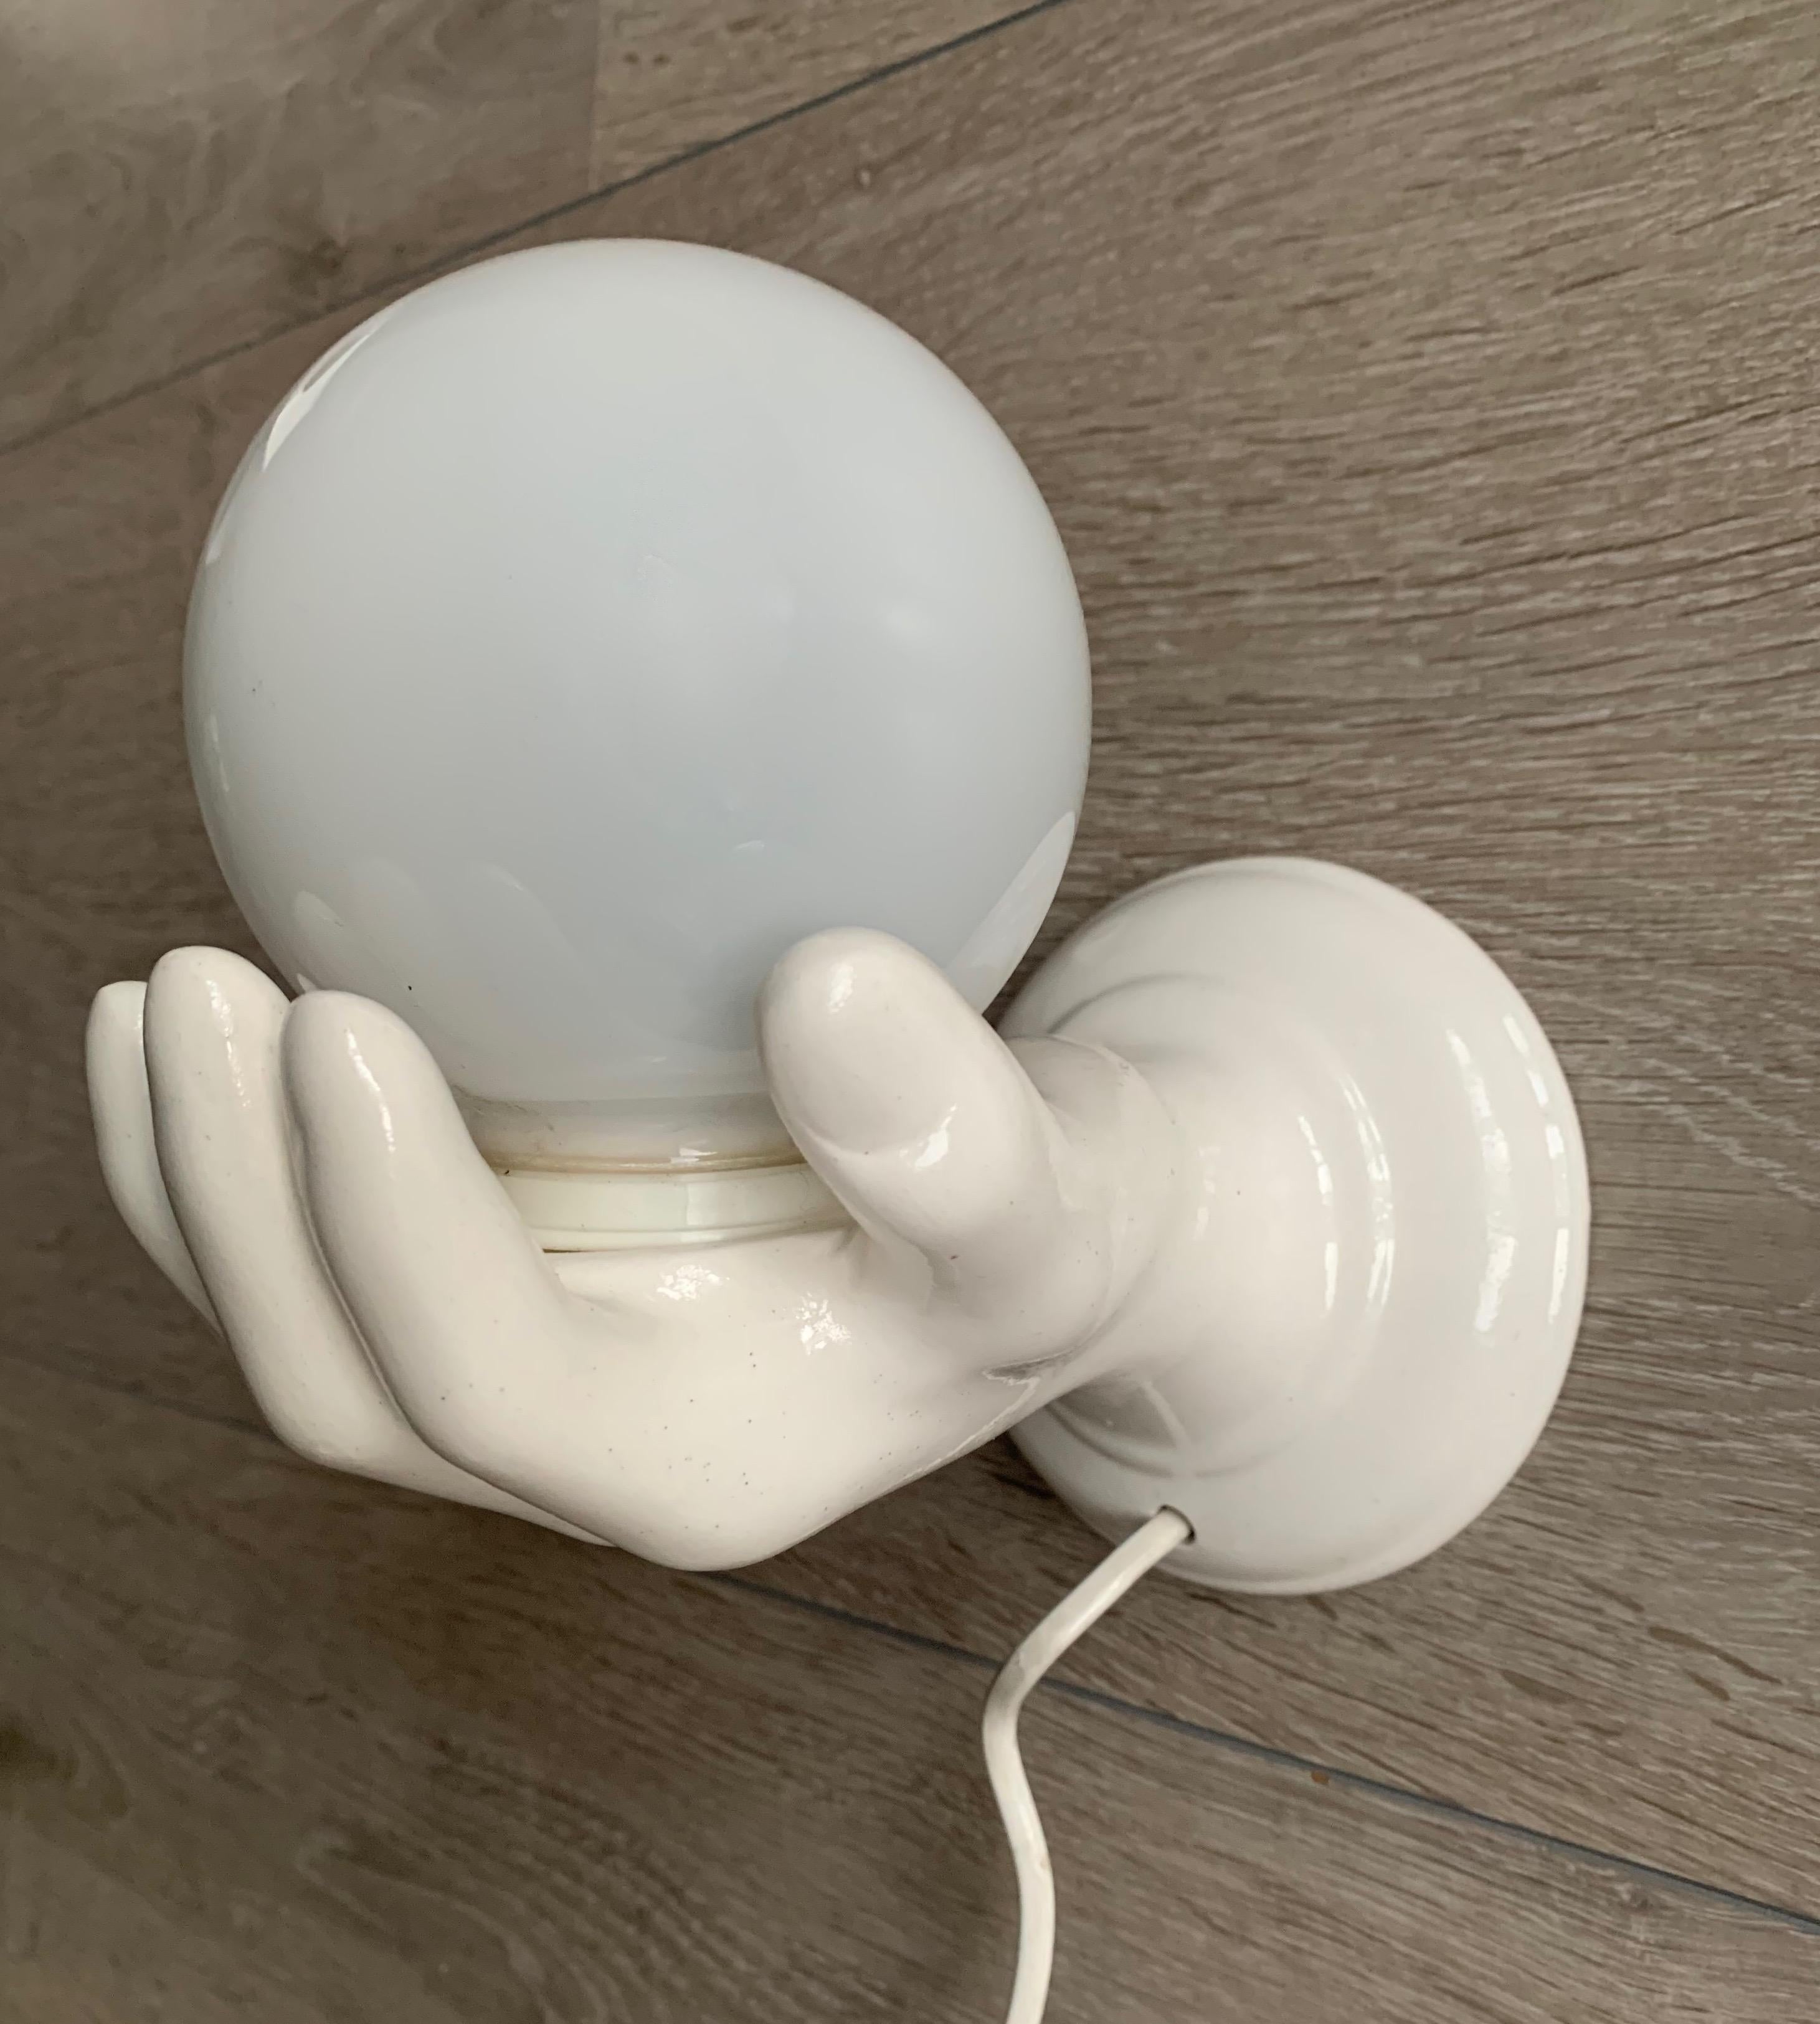 20th Century 1970s Glazed White Ceramic Hand Holding a Glass Globe Wall Sconce or Wall Light